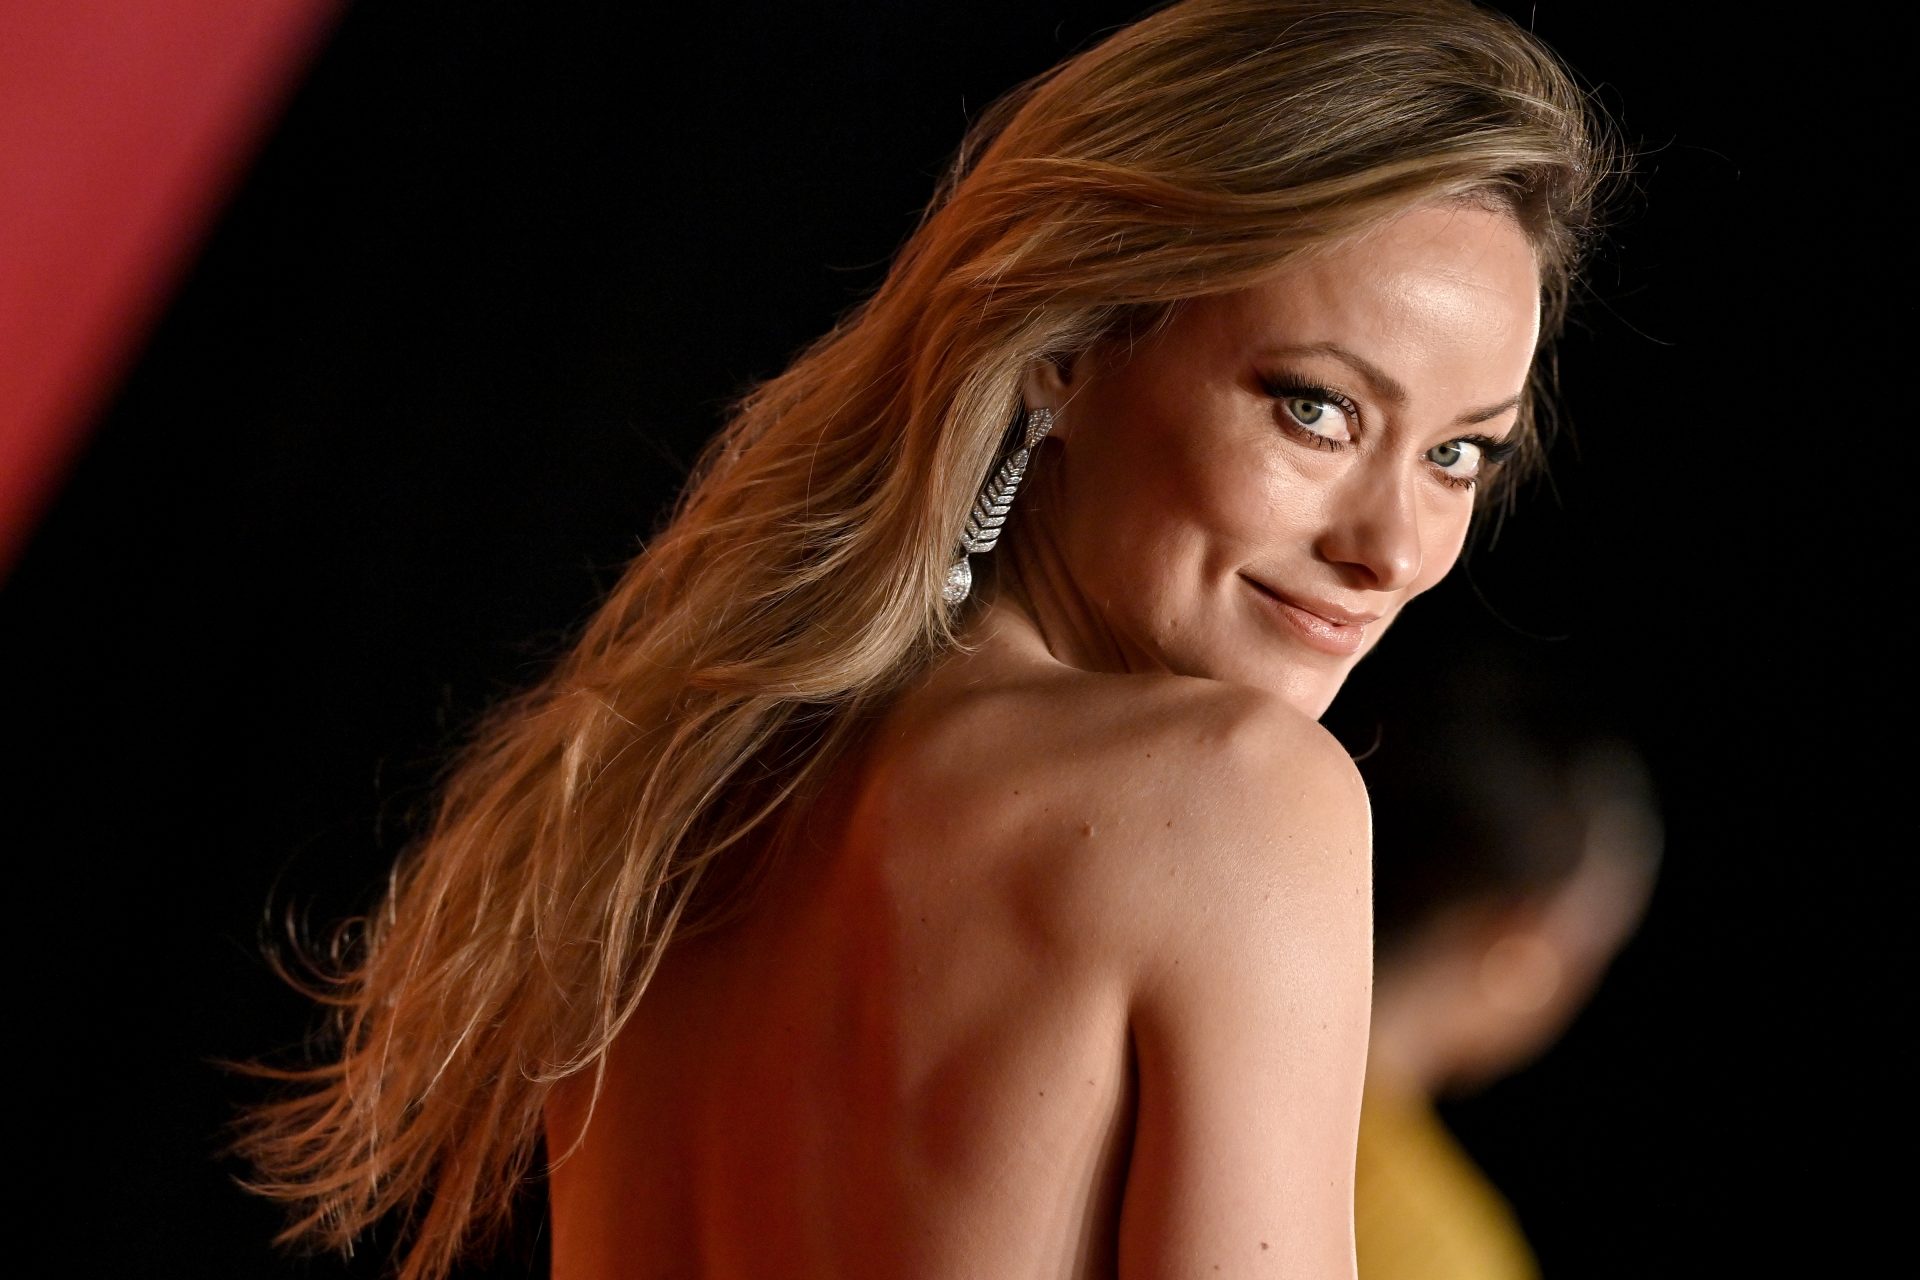 The career of Olivia Wilde in photos